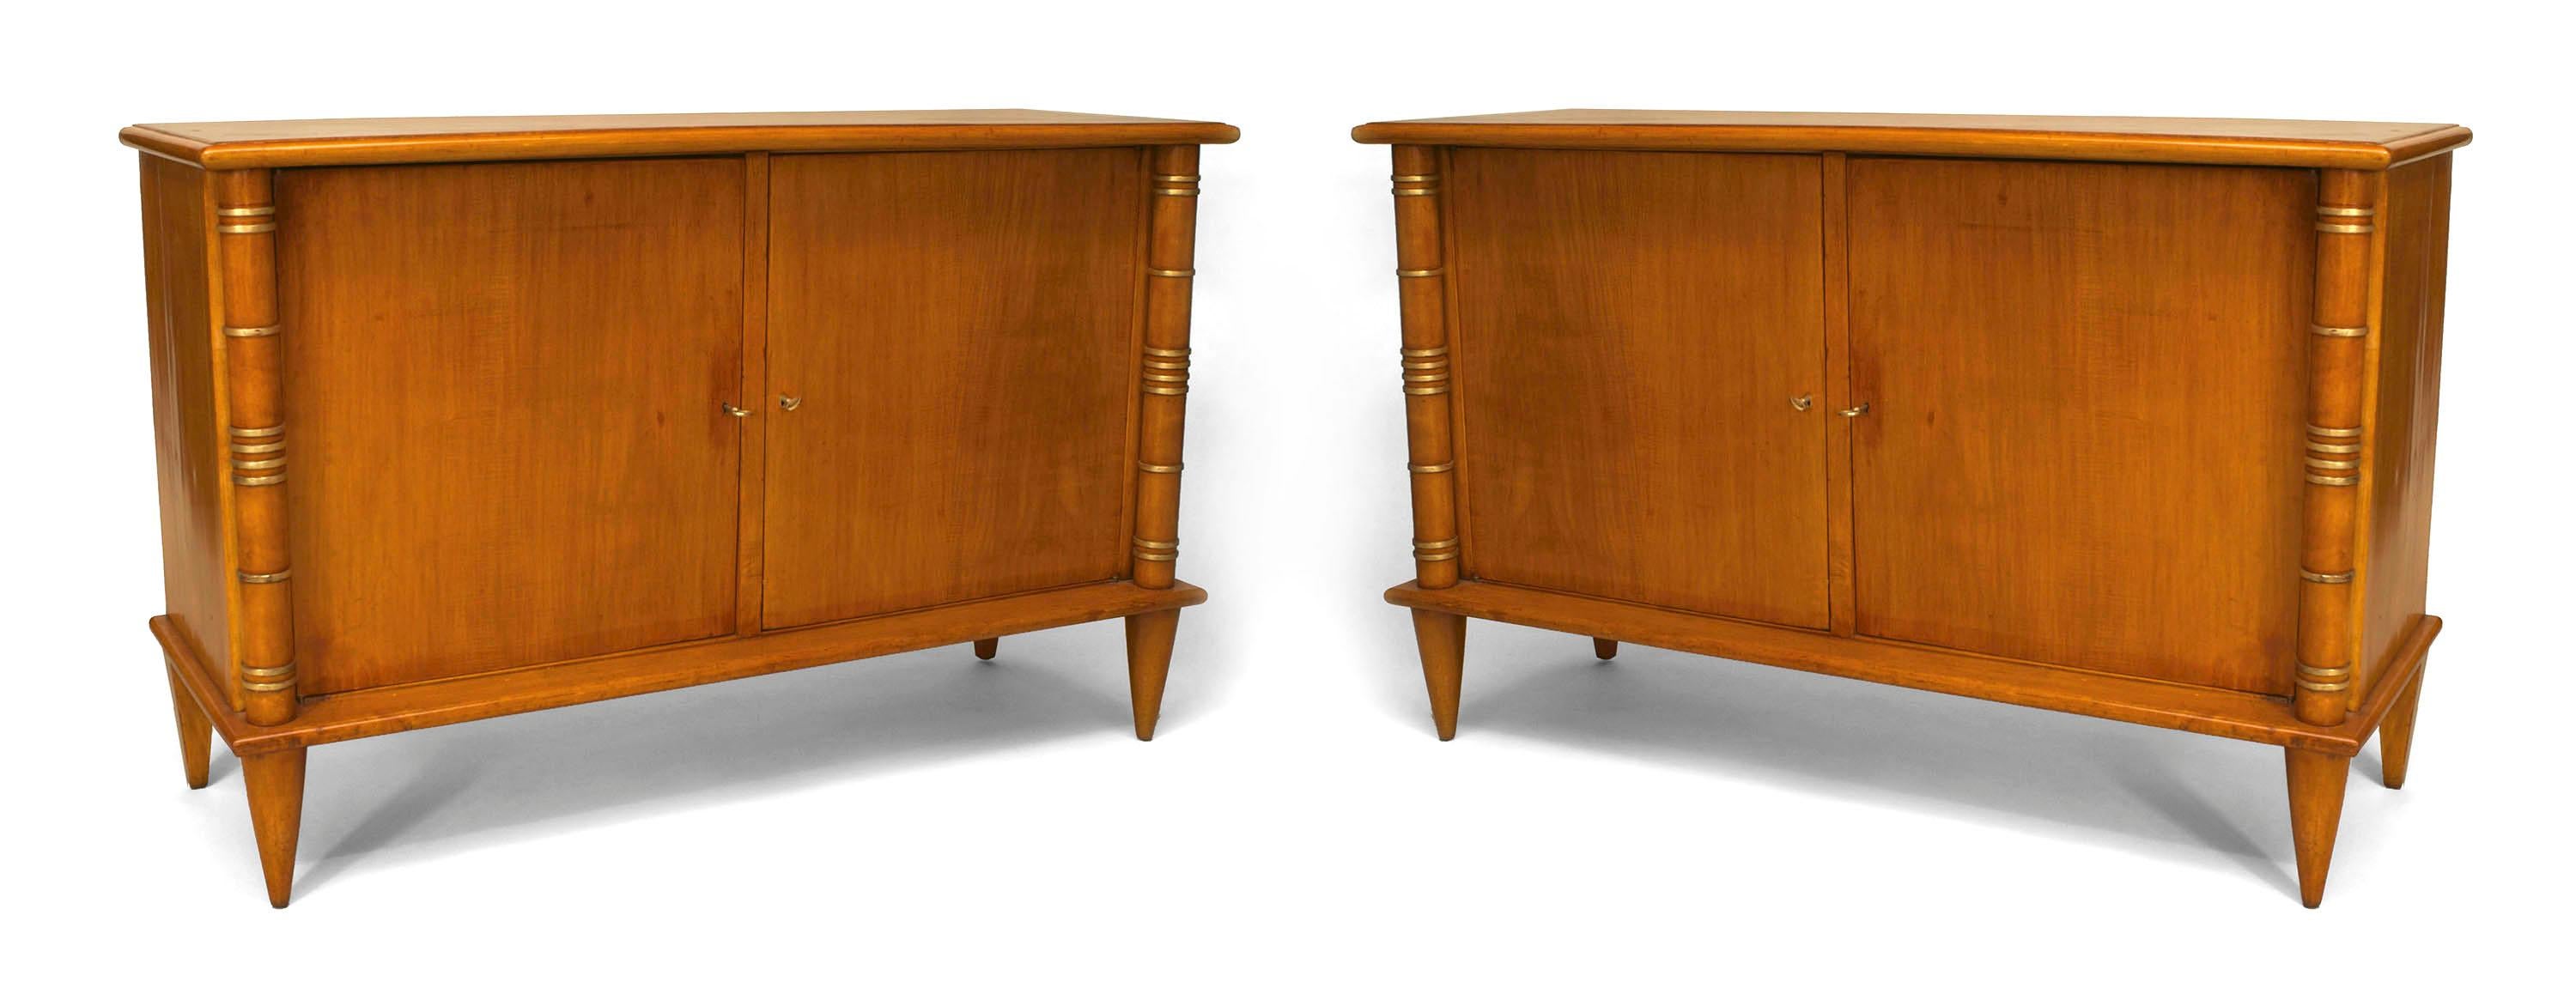 Attributed to French Art Deco designers Maurice and Leon Jallot, each rectangular sycamore commode rests upon four tapered conical legs and features two doors flanked by column sides decorated with gilt trimmed rings.


Maurice Jallot was born in